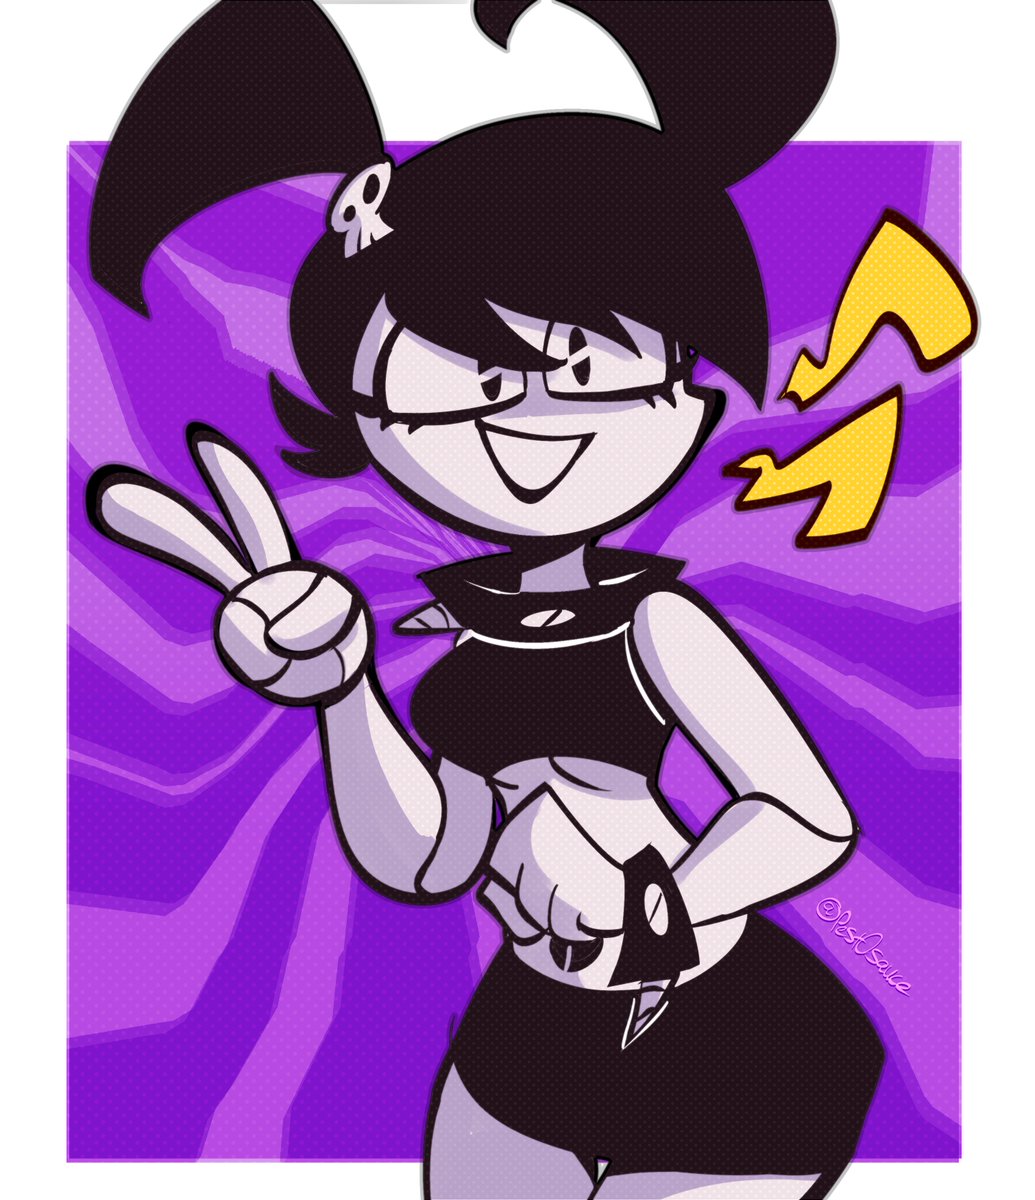 RT @pest0sauce: I love @Valbun_ 's goth Jenny design so so much https://t.co/7NOUgyyVBn